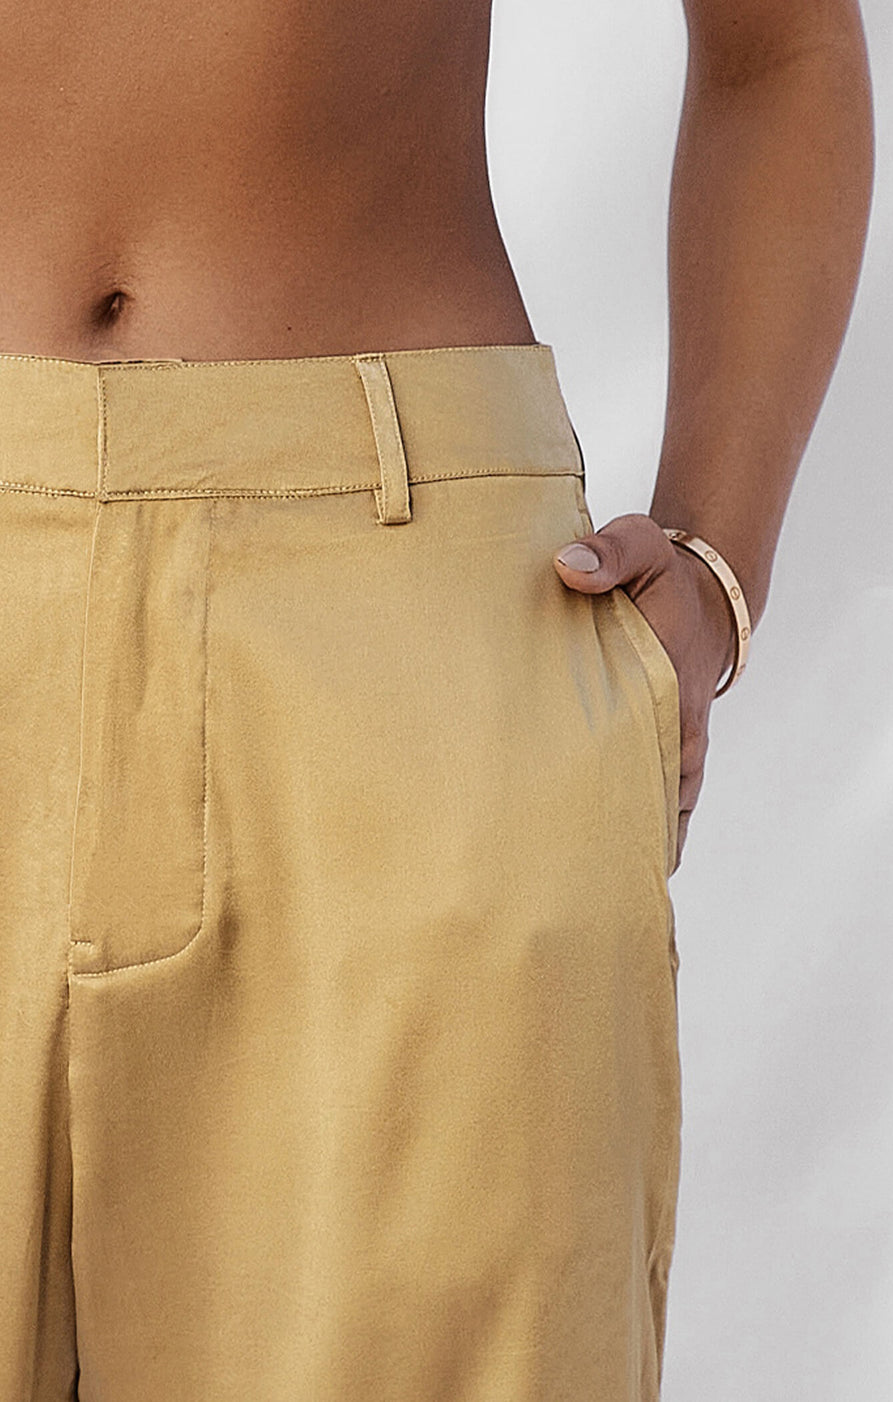 THE SILK CLASSIC PANT - GOLD